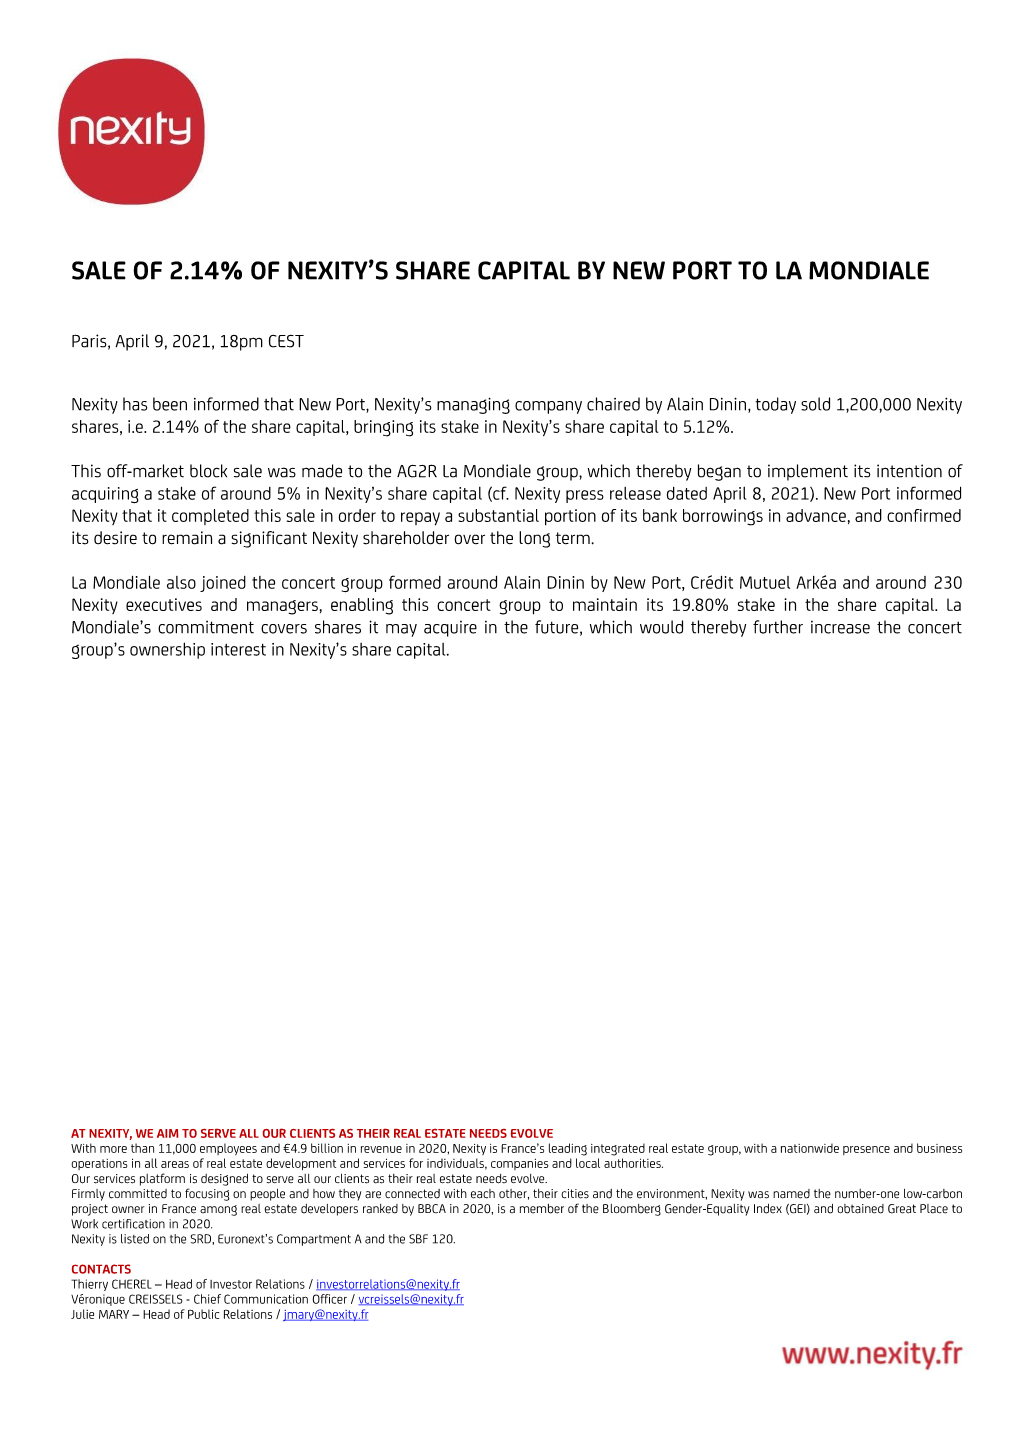 Sale of 2.14% of Nexity's Share Capital by New Port to La